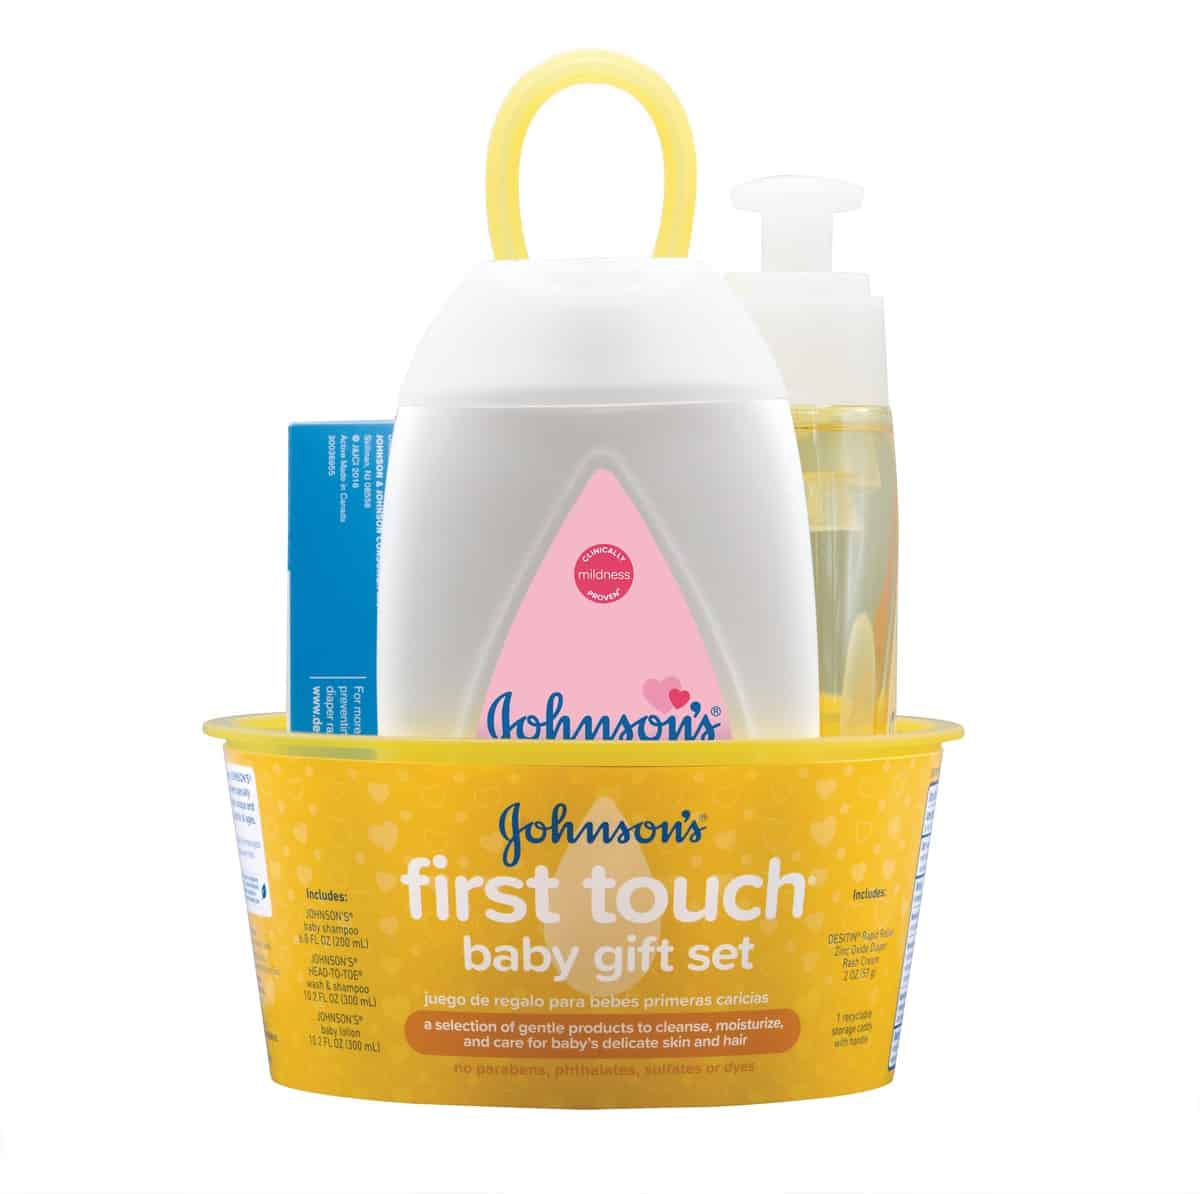 Johnsons First Touch Baby Gift Set  Daily Mom Parents Portal Gifts For Parents And Kids To Enjoy